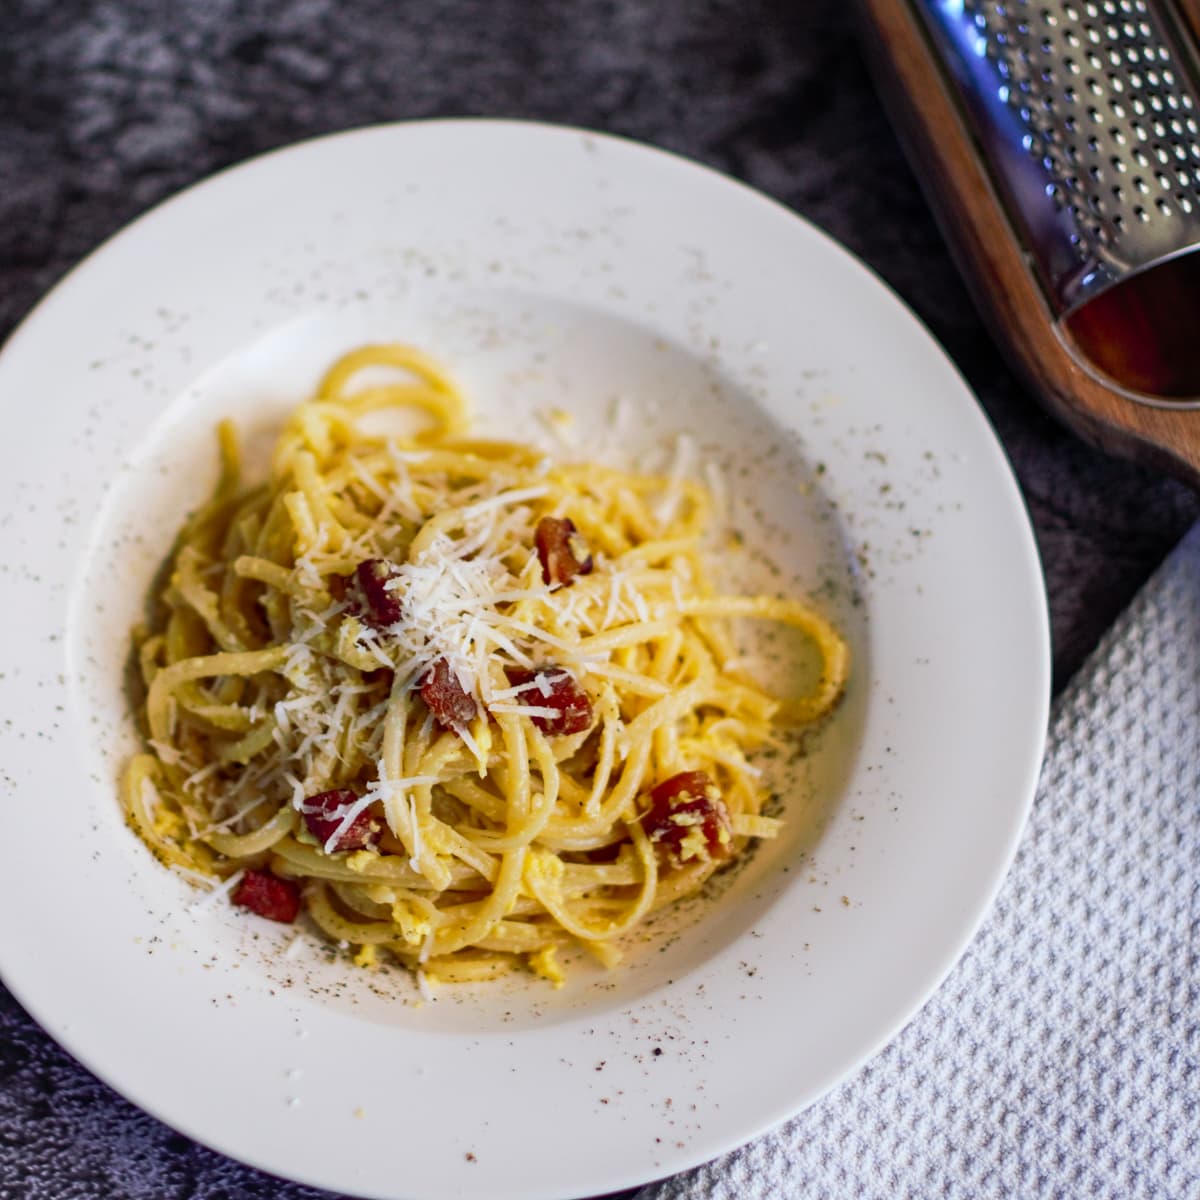 Italian carbonara pasta with fried guanciale.